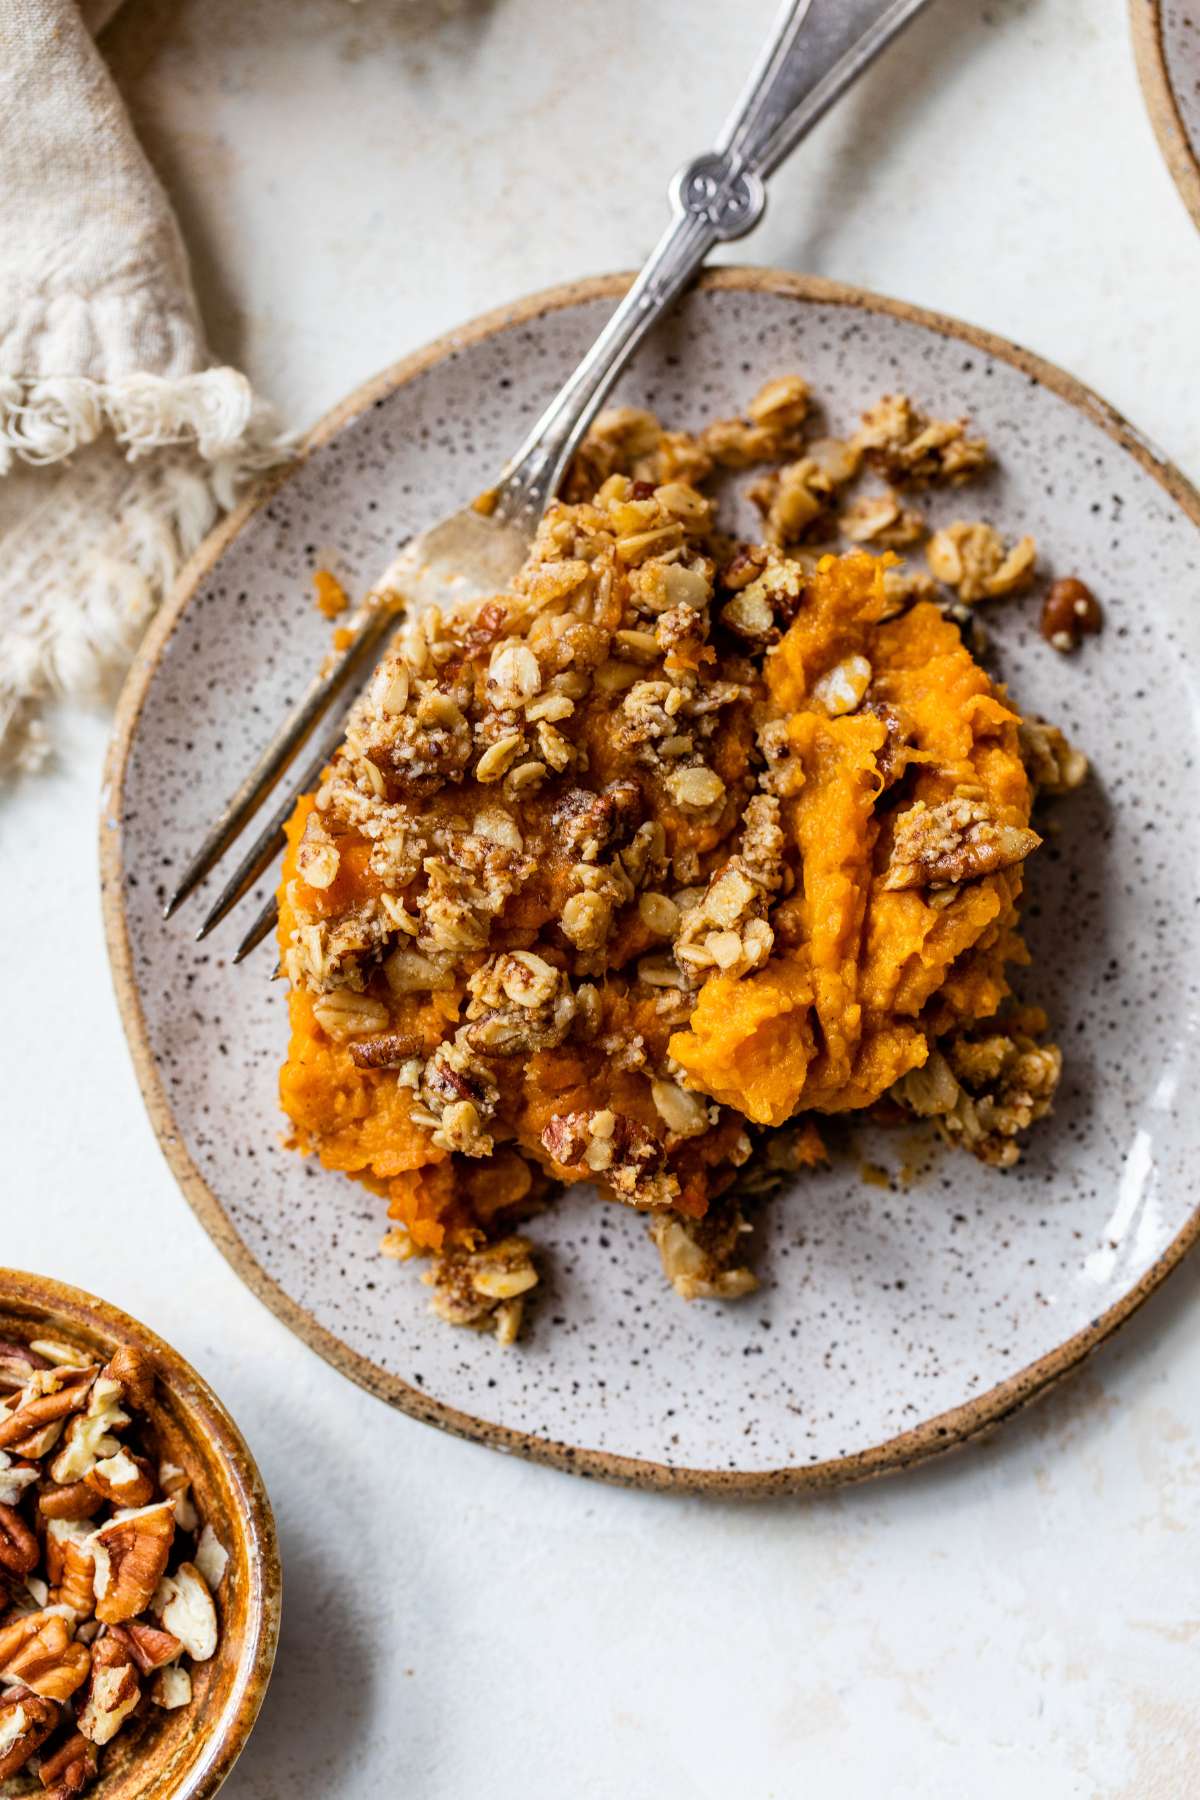 A serving of sweet potato casserole on a plate with a fork.